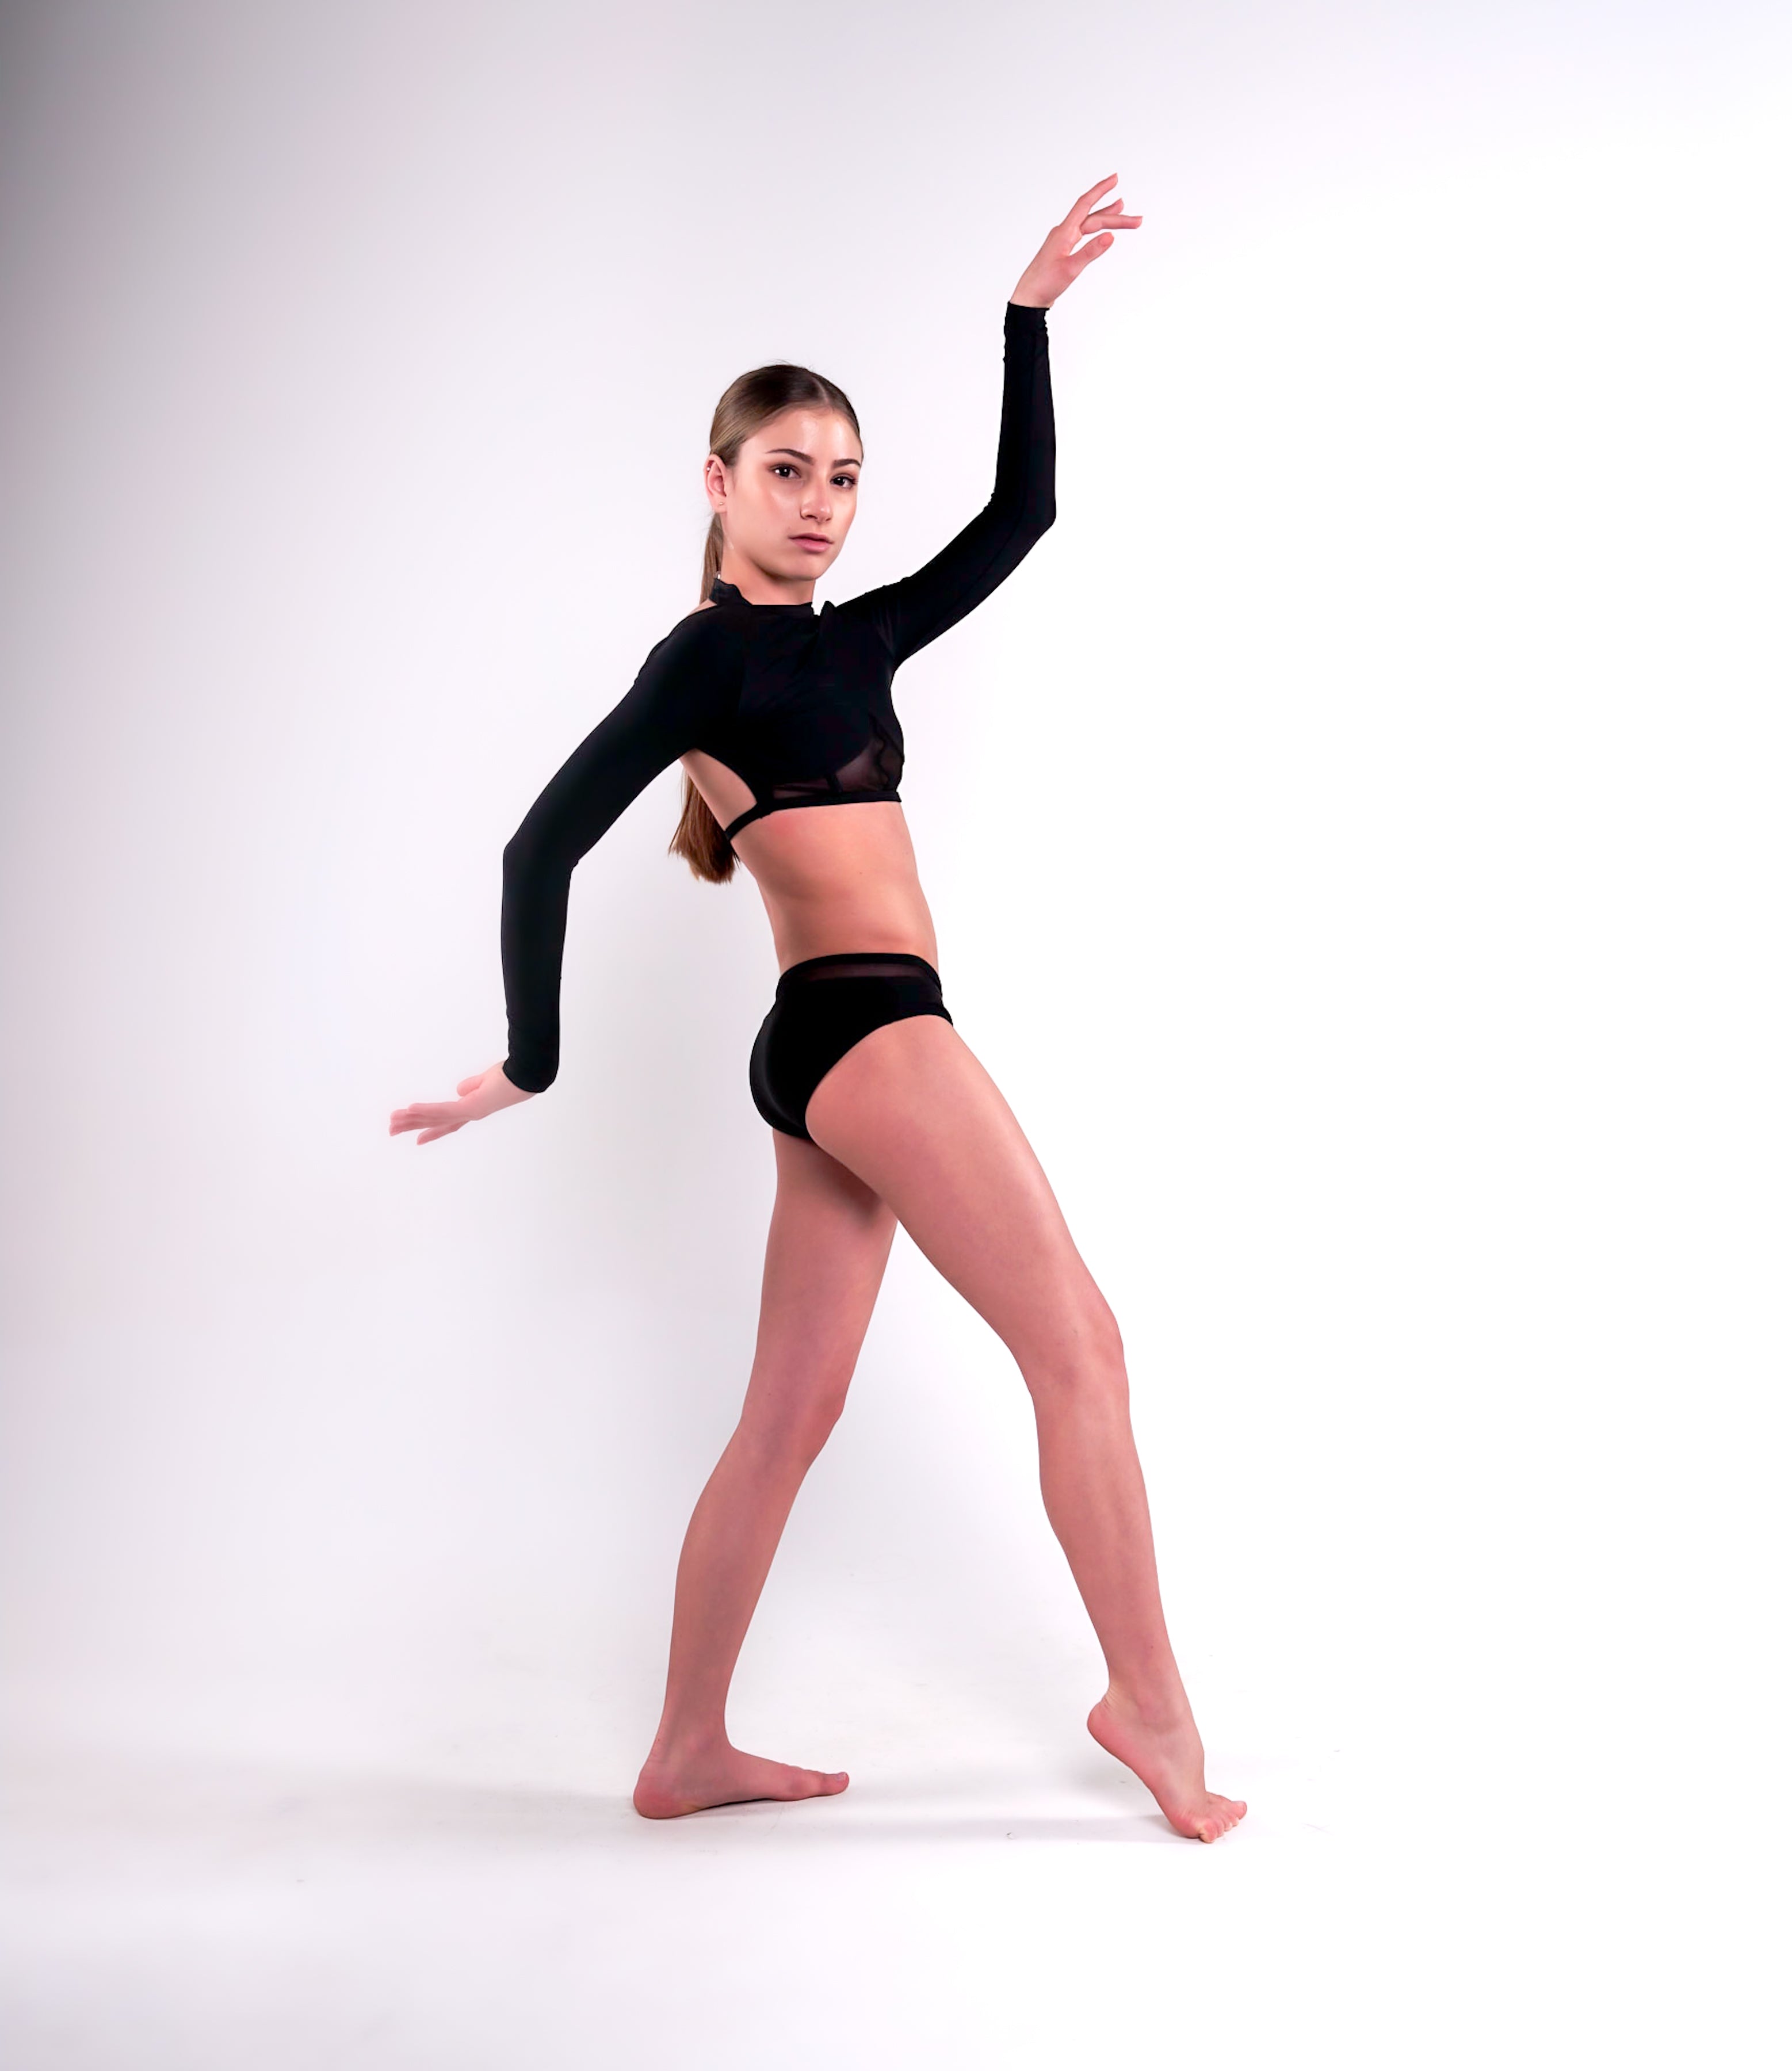 Shop All Dance Costumes